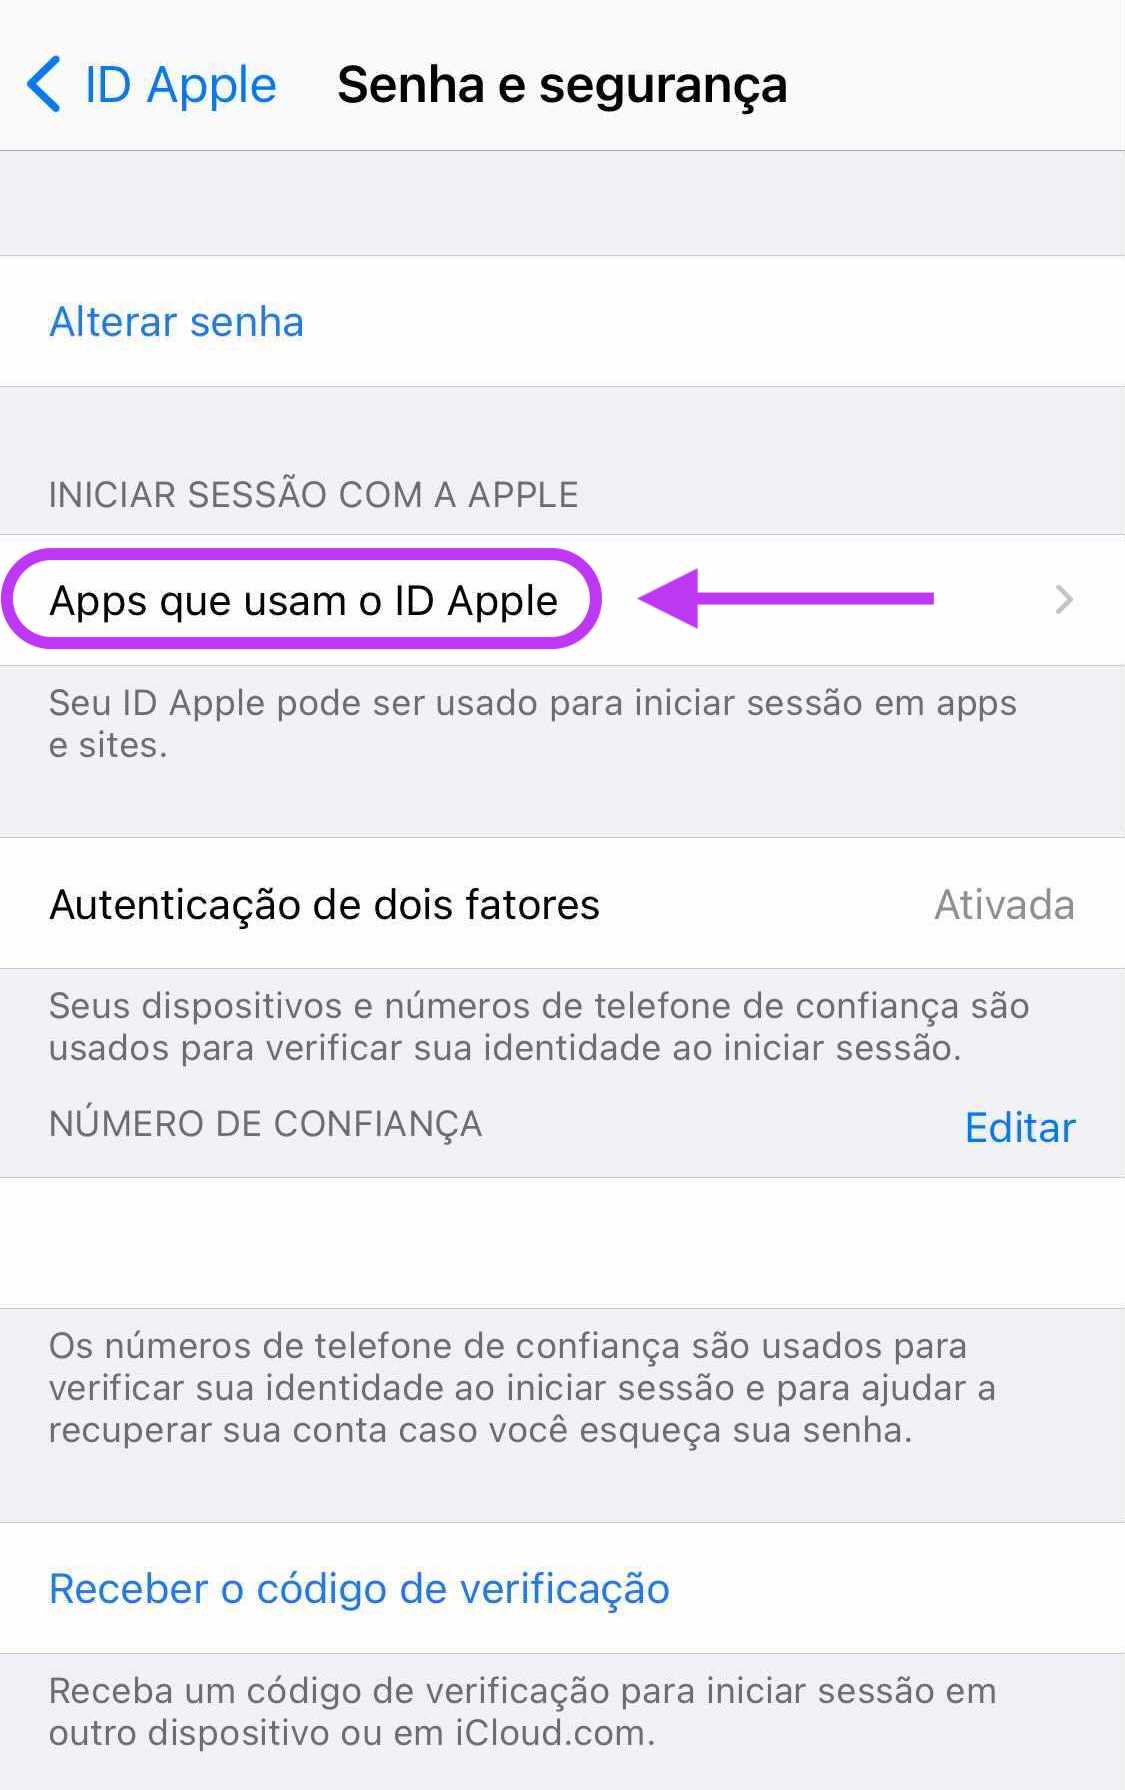 How_to_find_Apple_Shadow_ID__3__PT_BR.jpg